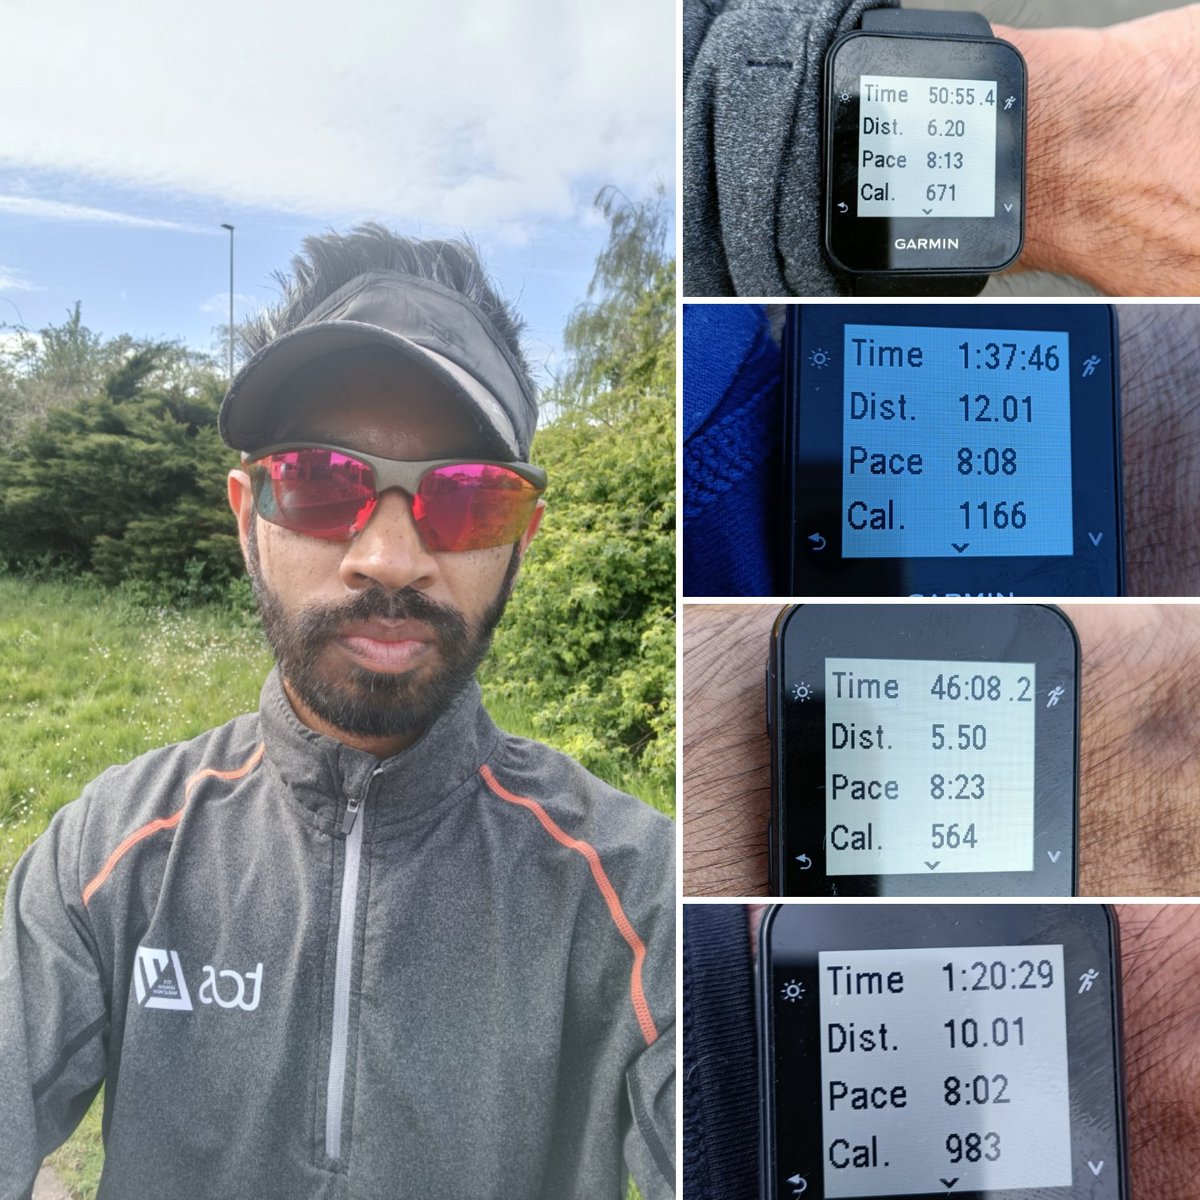 #10k this morning in addition to three more recent runs to take me to 492.9 miles ran this year and all part of my challenge of #running #2024milesin2024 for @Bham_Childrens. 

Show your support to an amazing cause and donate what you can. ❤️😊
justgiving.com/page/mp2024bch